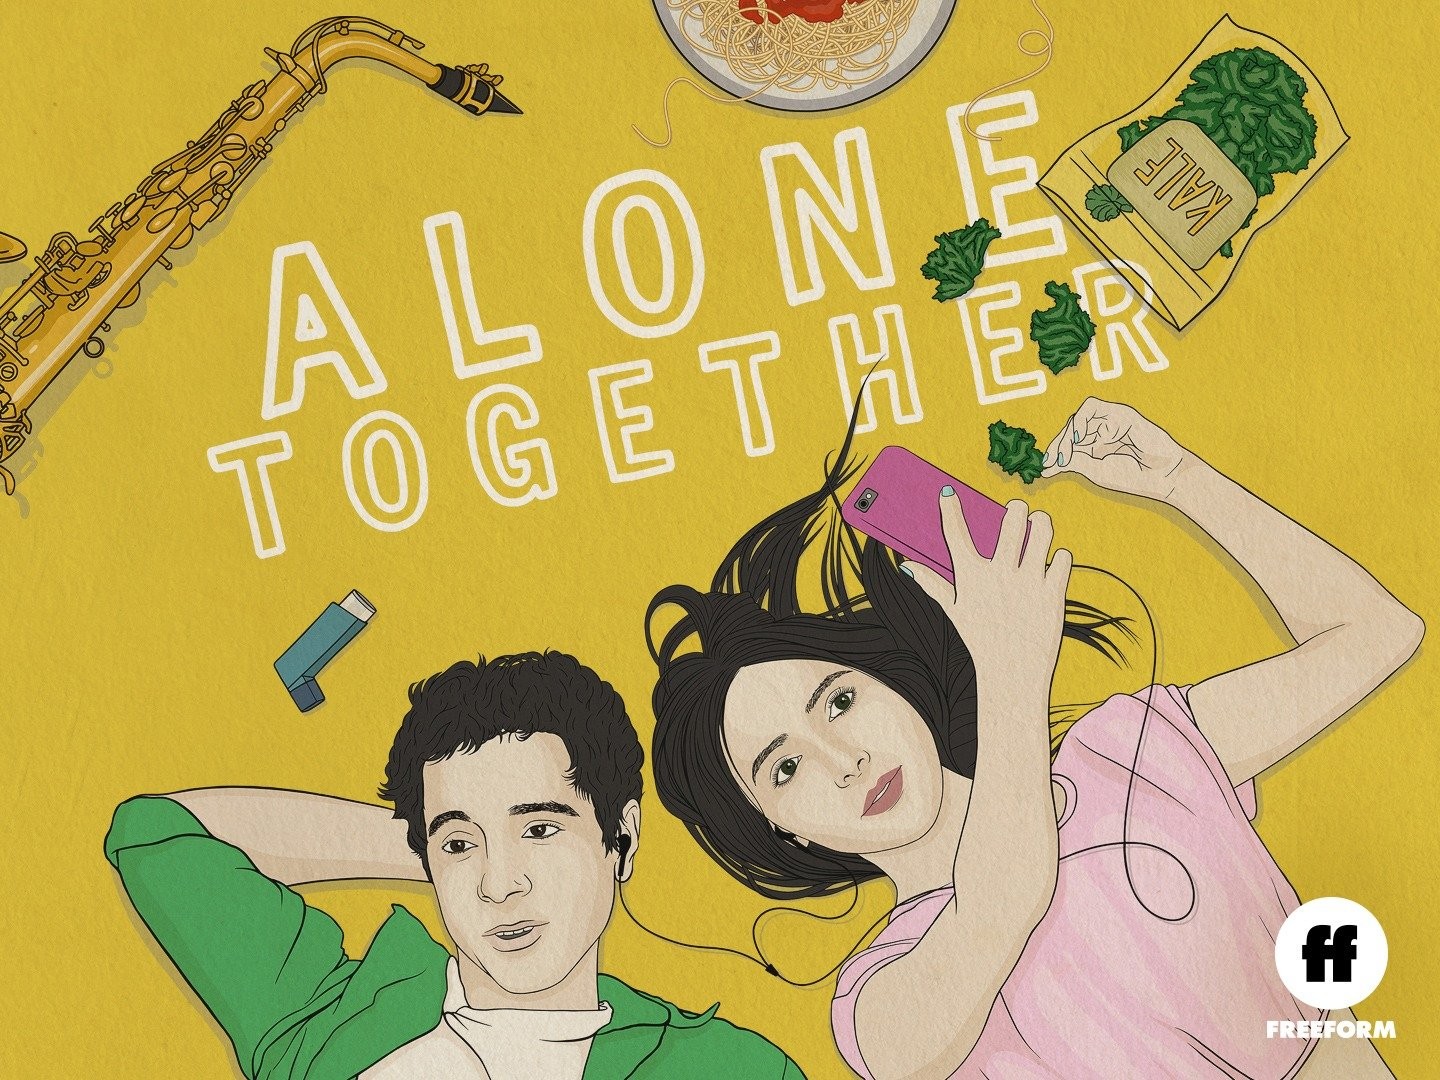 Alone and together